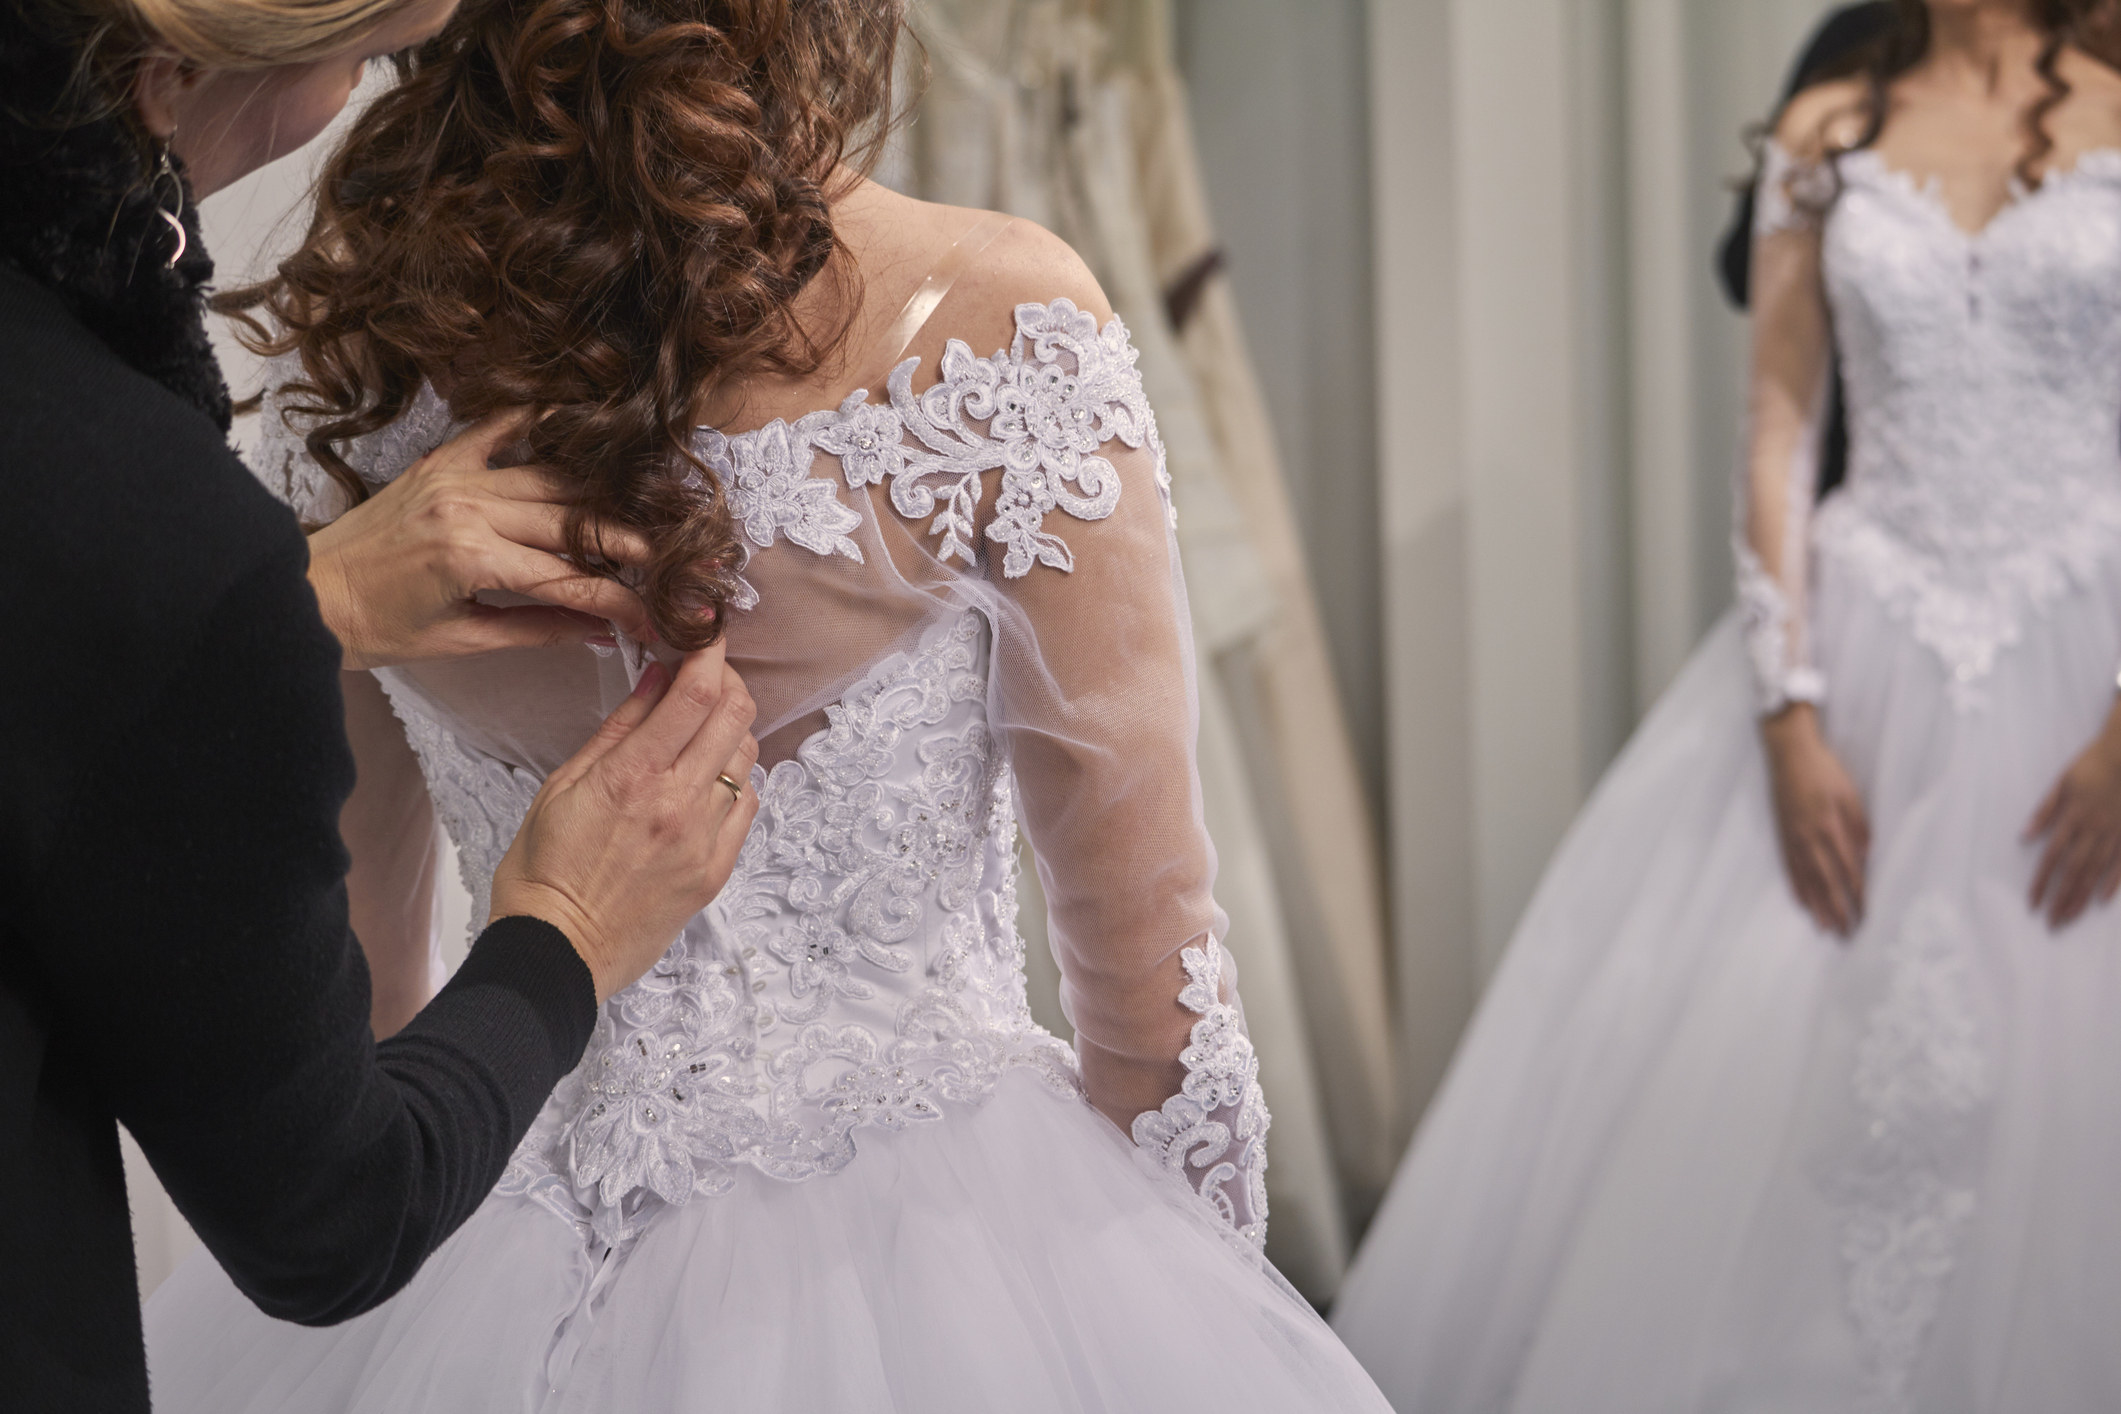 A bride-to-be tries on a wedding dress at a boutique